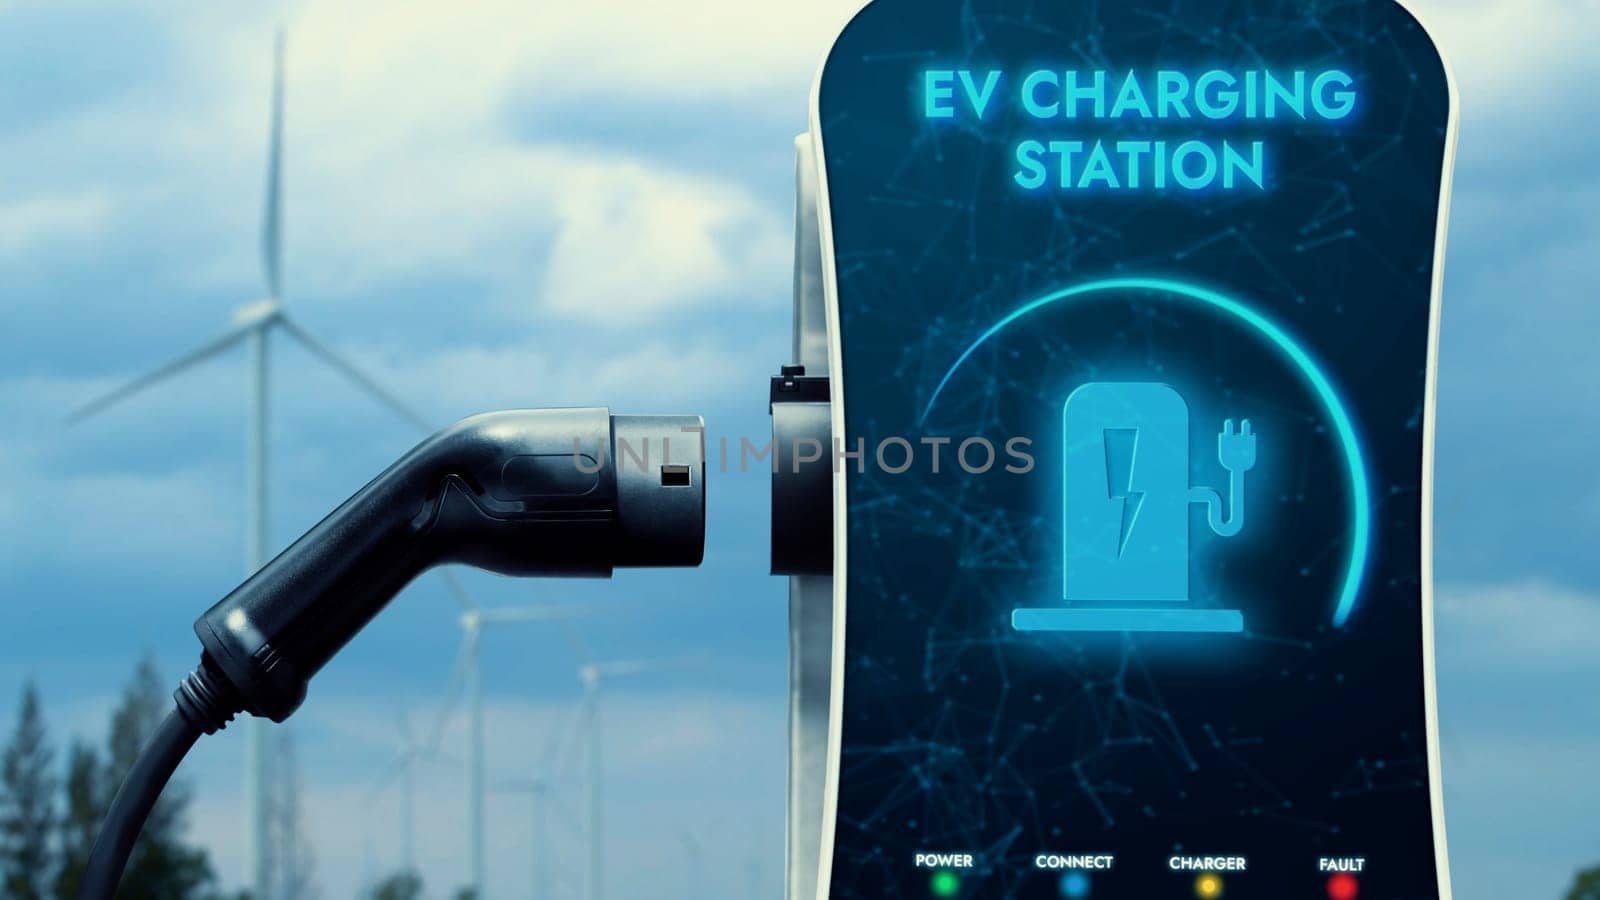 EV charger from EV car charging station in nature and wind turbine farm reducing CO2 emission. Technological advancement of alternative energy sustainability and EV car. Peruse